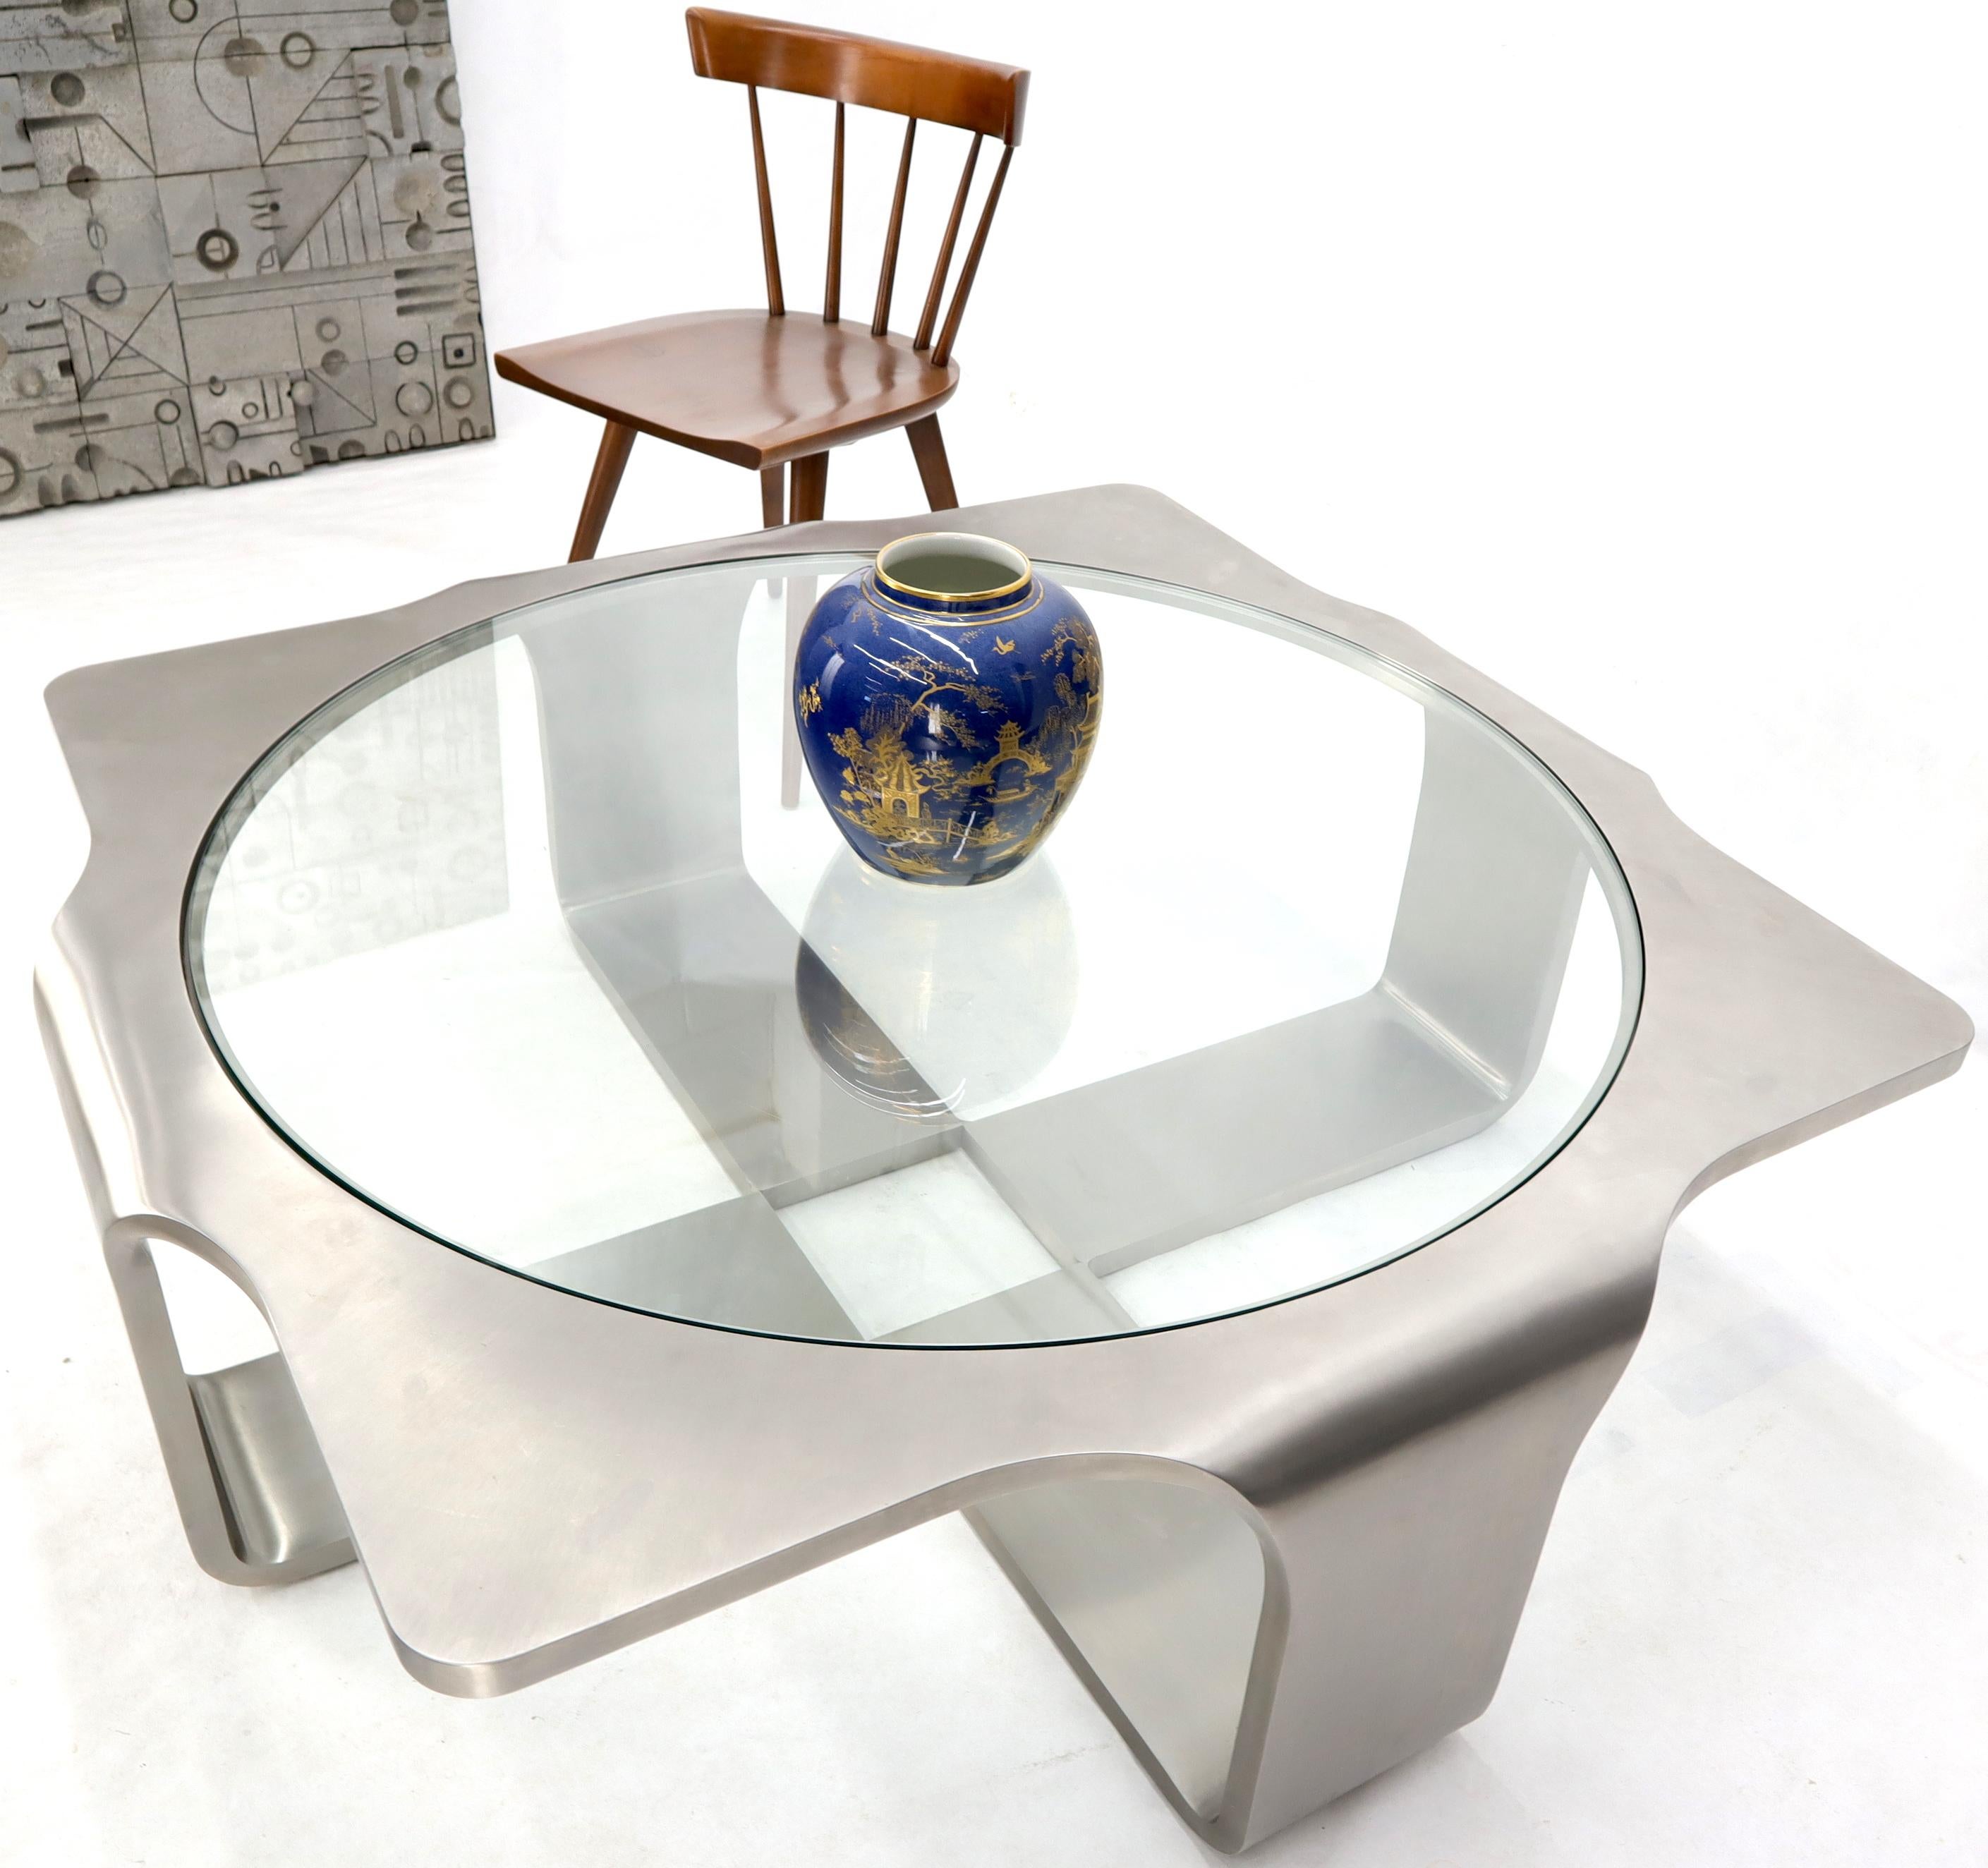 Unusual and unreal craftsmanship coffee table folded out of continuous 1